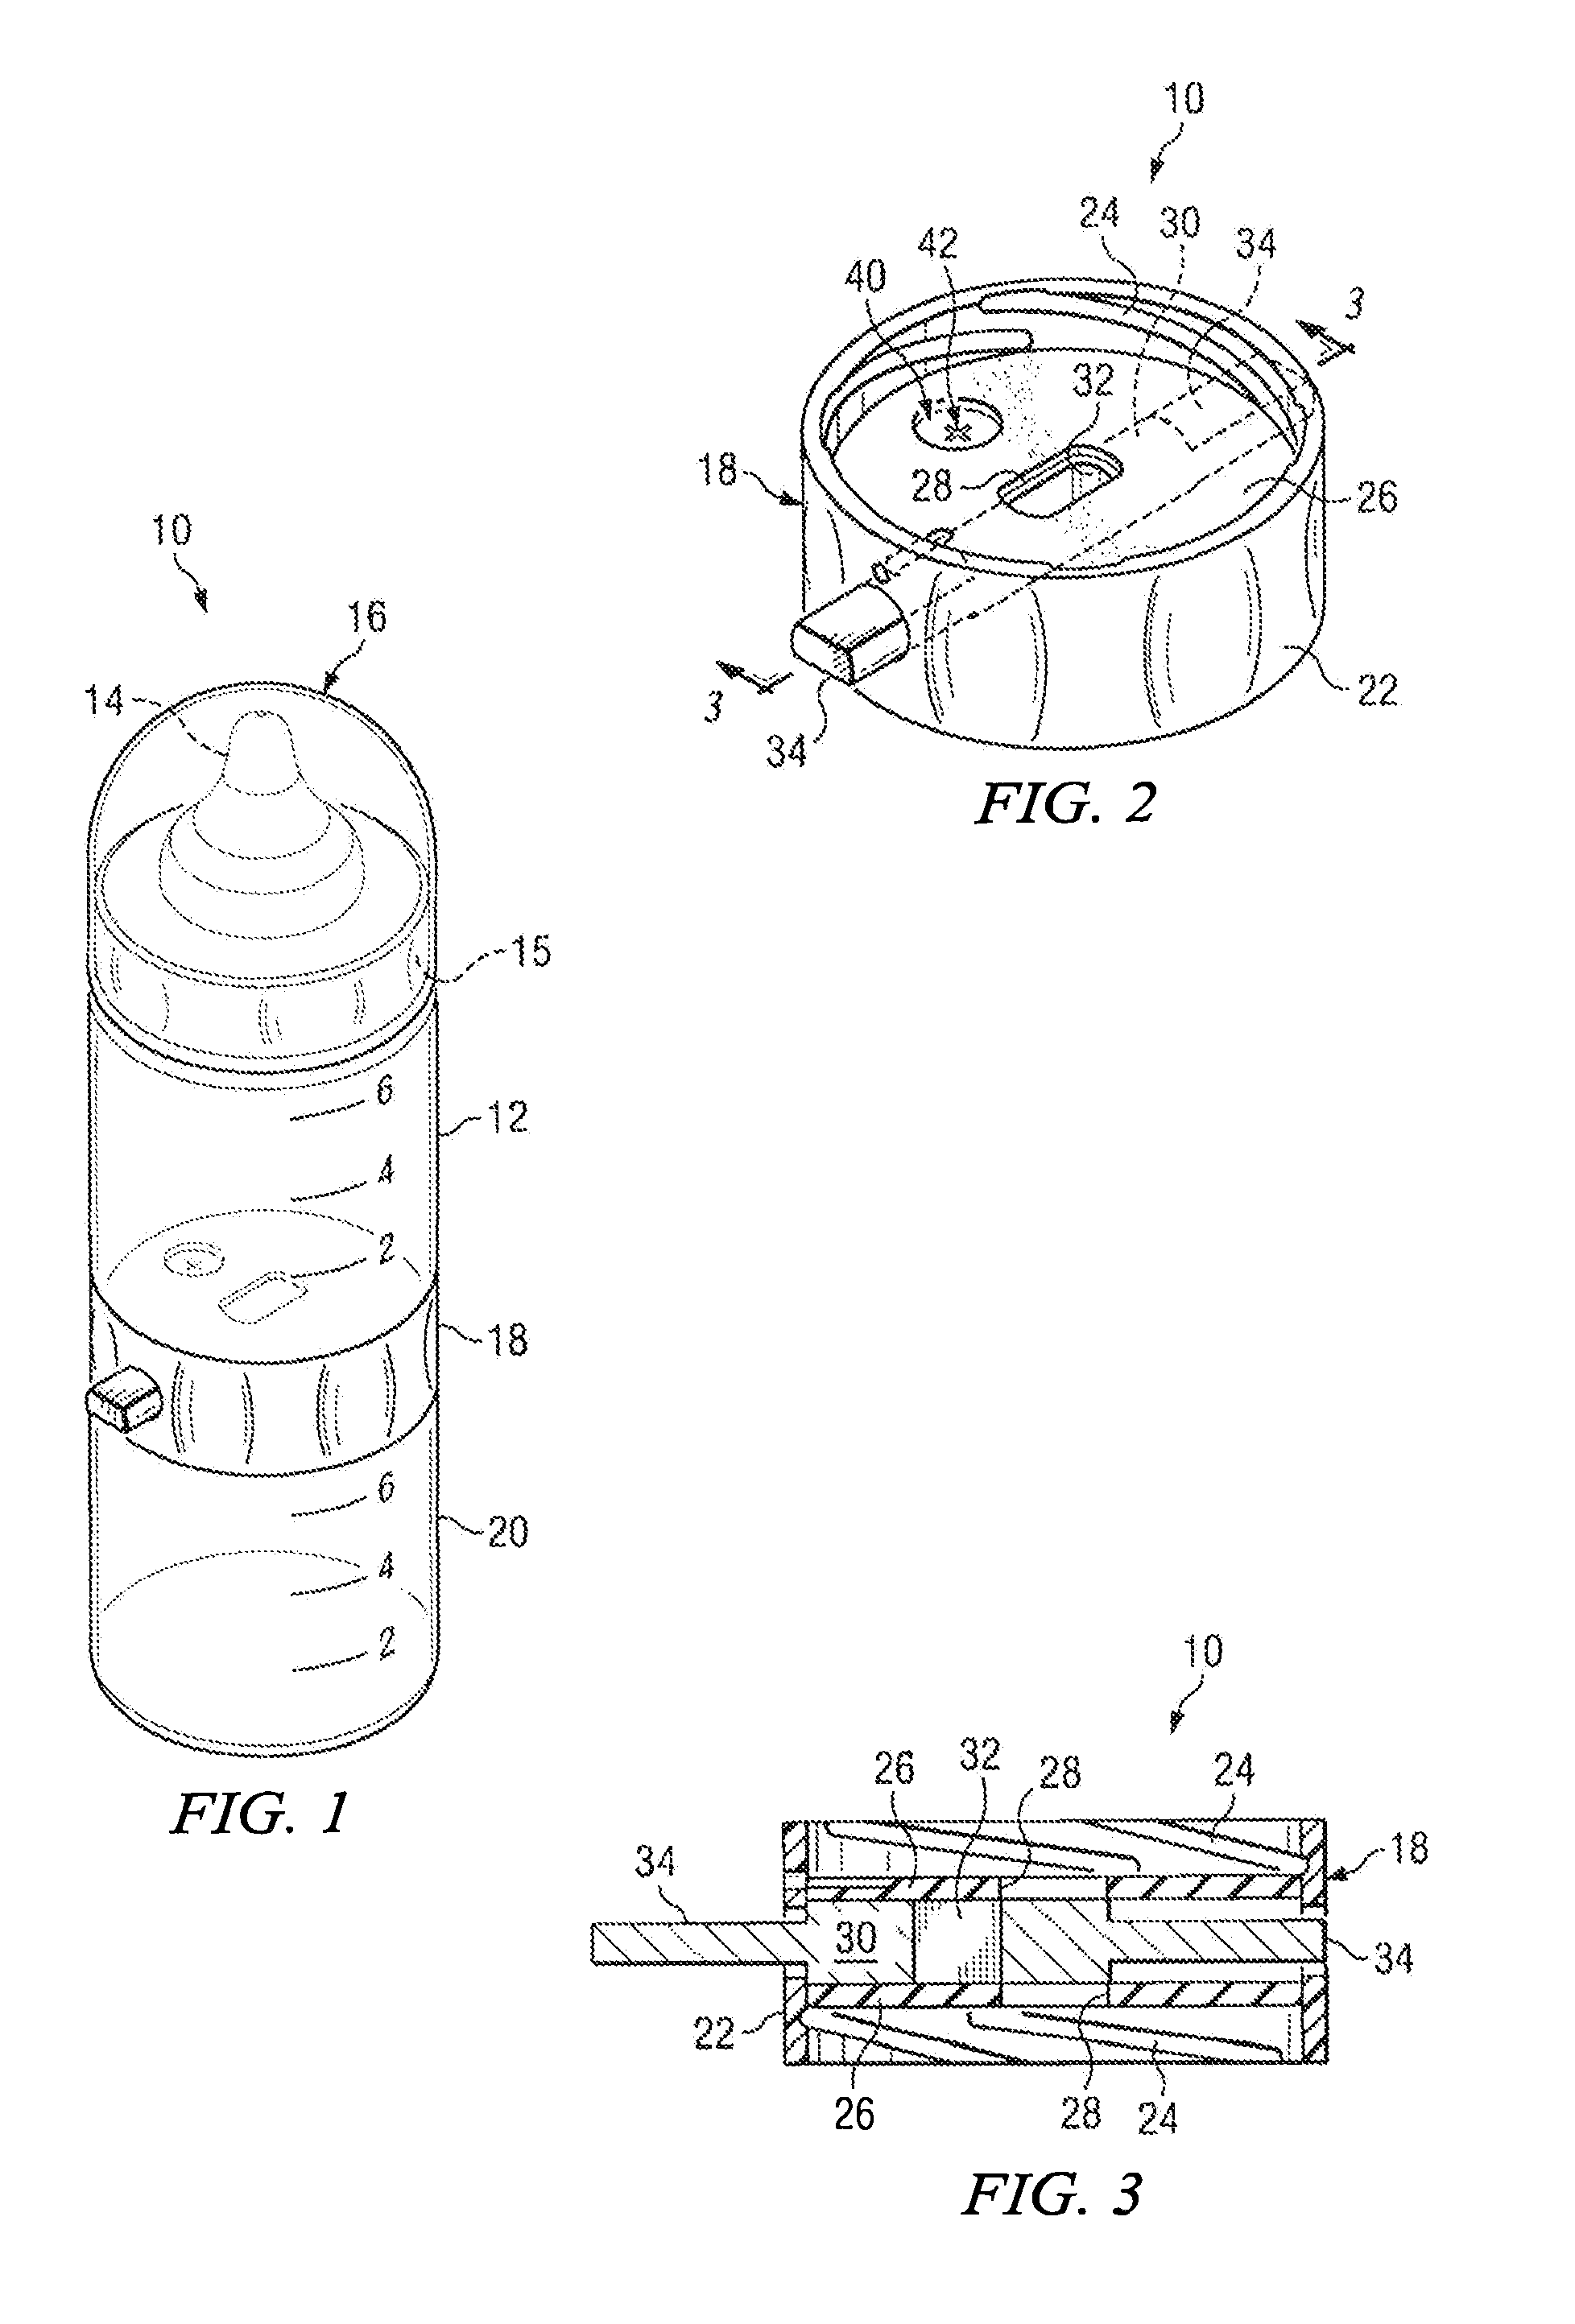 Transportable feeding system for infants and the like